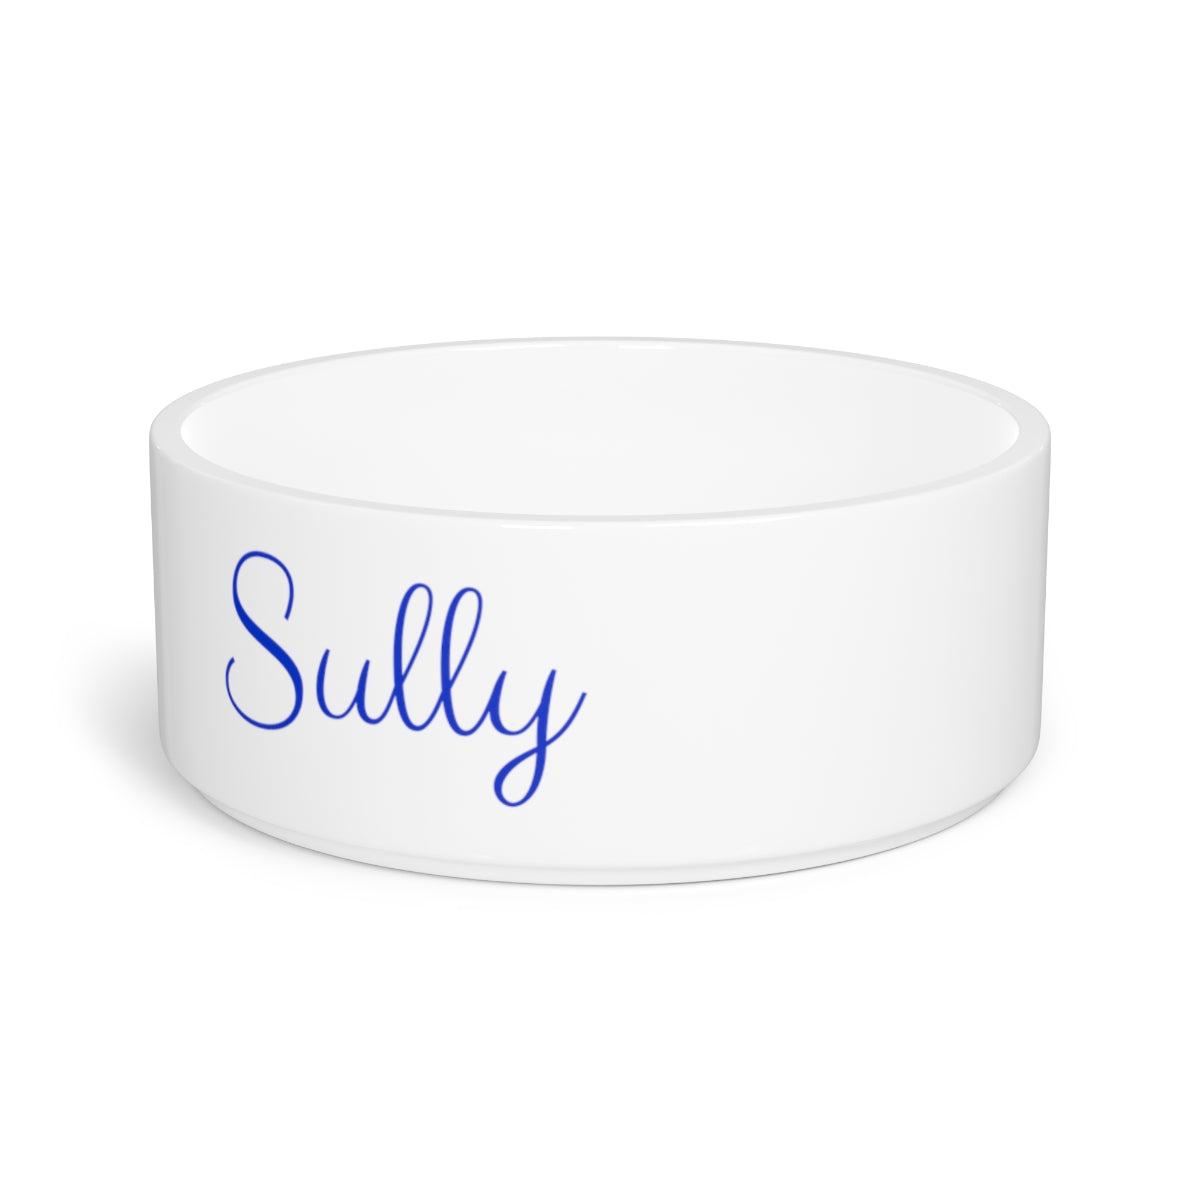 Get trendy with Personalized Pet Bowl -  available at Good Gift Company. Grab yours for $29.99 today!